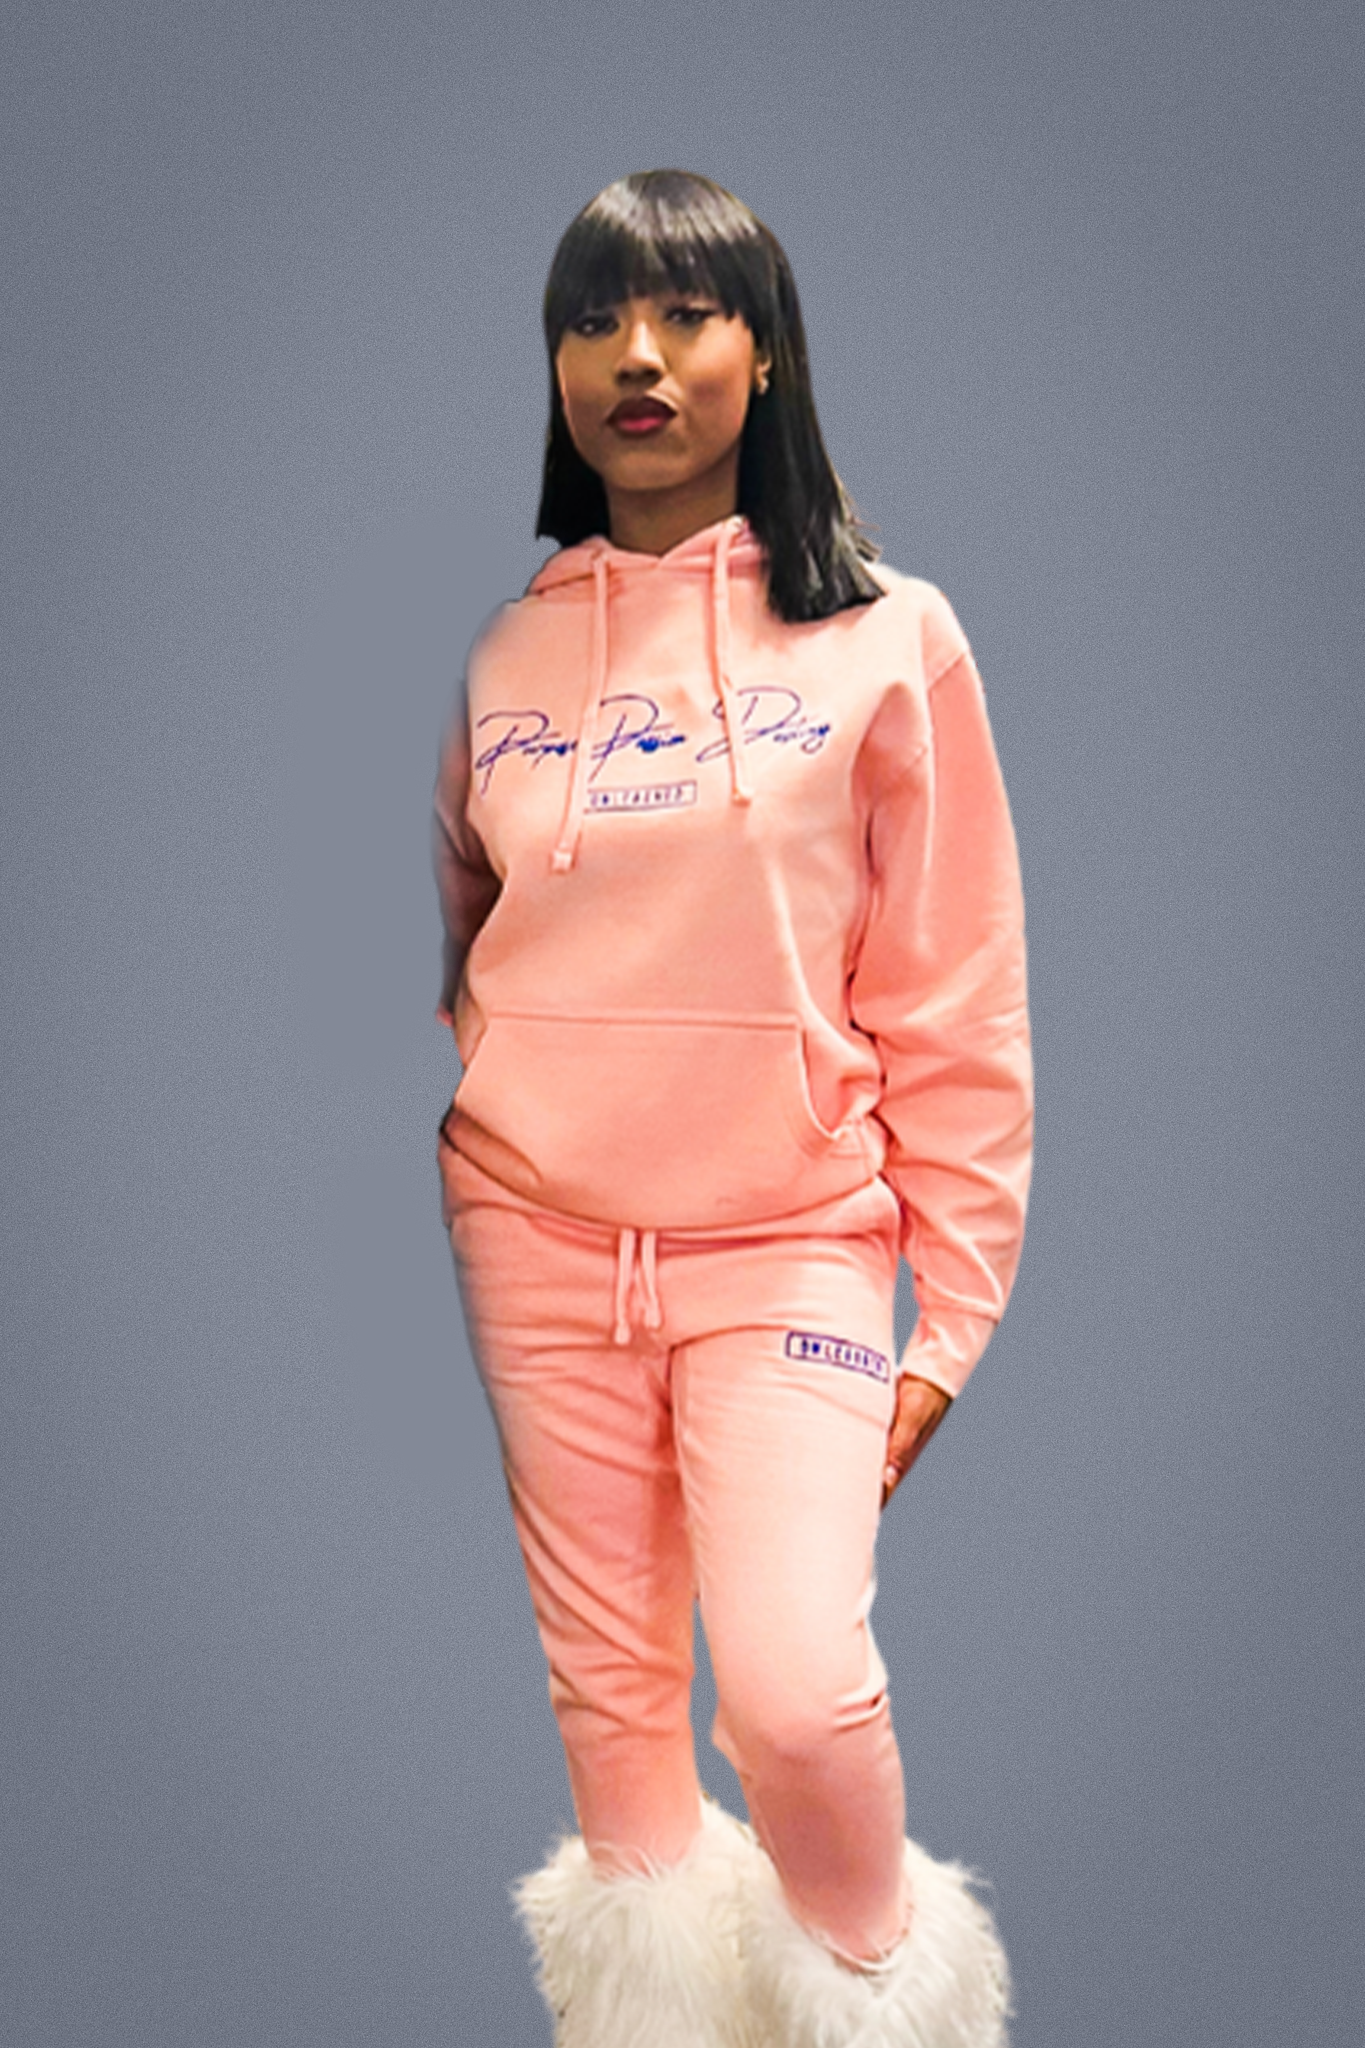 Unleashed - Purpose Passion Destiny embroidered Jogger set